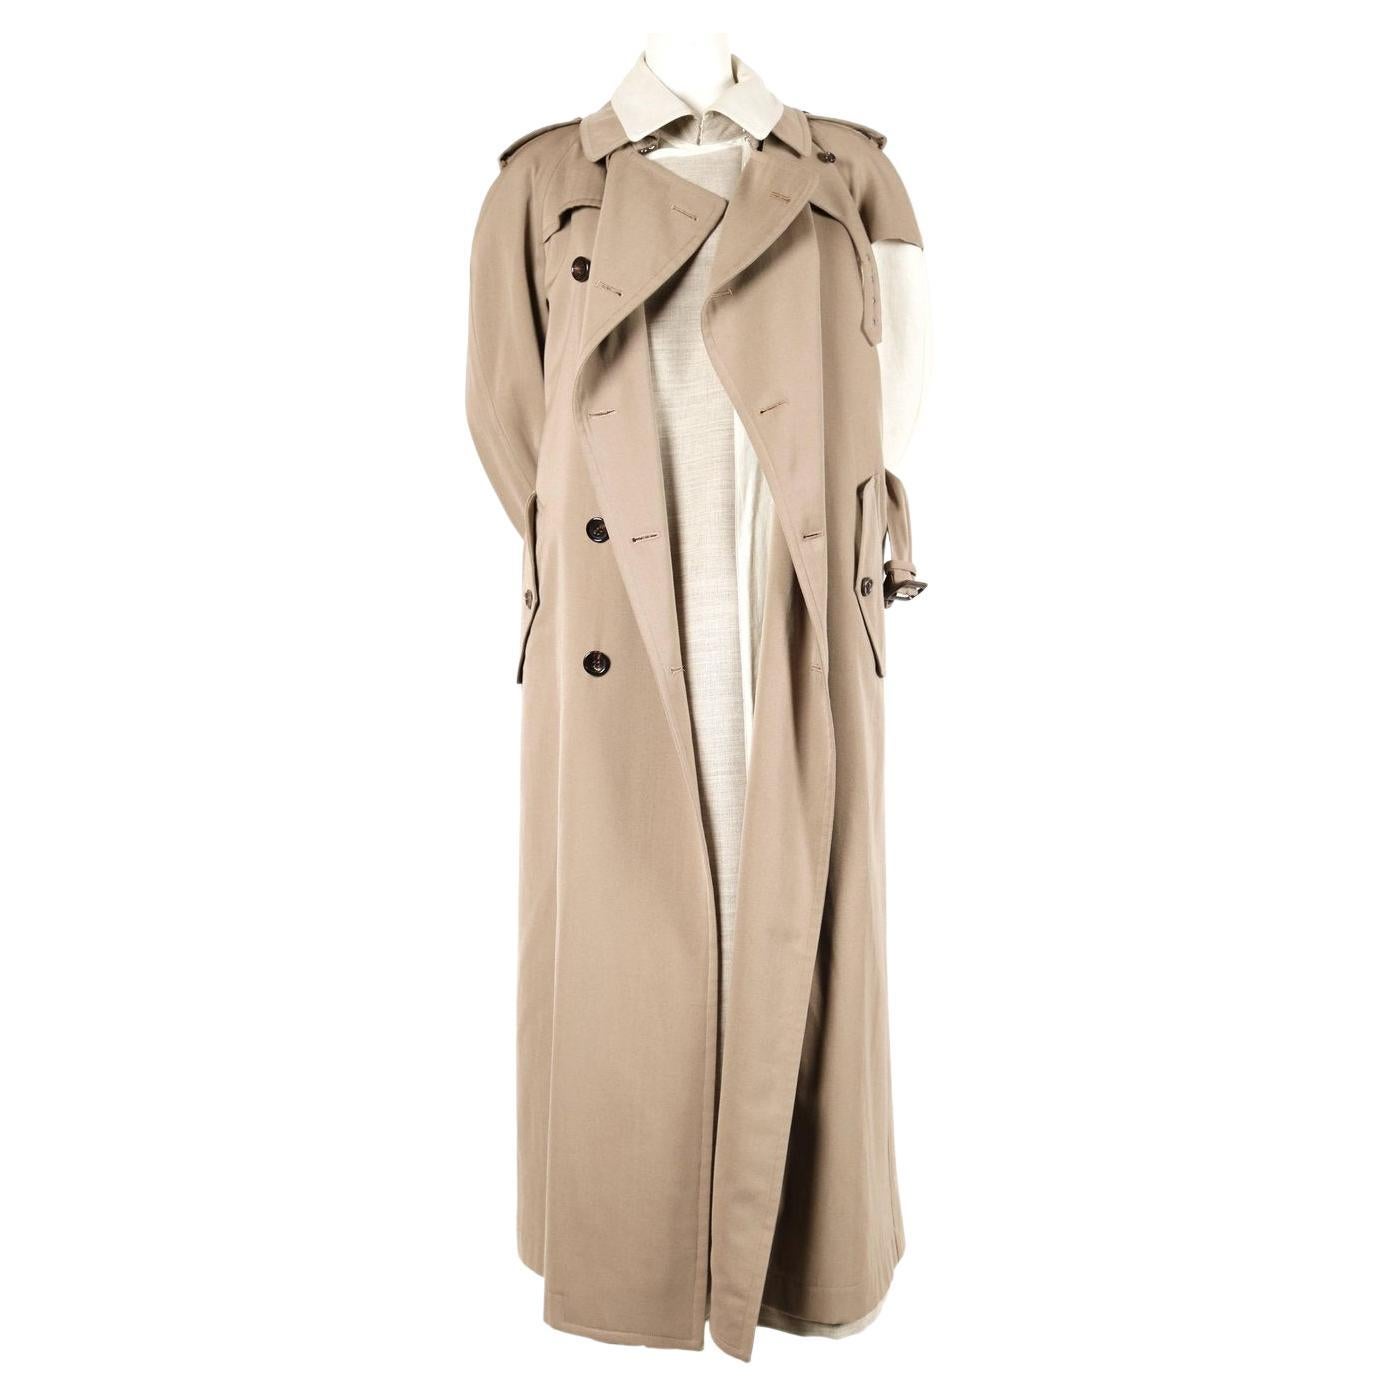 Tan gabardine trench with one arm layered over a wool undercoat designed by Rei Kawakubo for Comme Des Garcons for fall of 1998. Very unusual piece. Similar coats were seen on the runway. Labeled a size 'M'. Due to the oversized cut, this piece fits